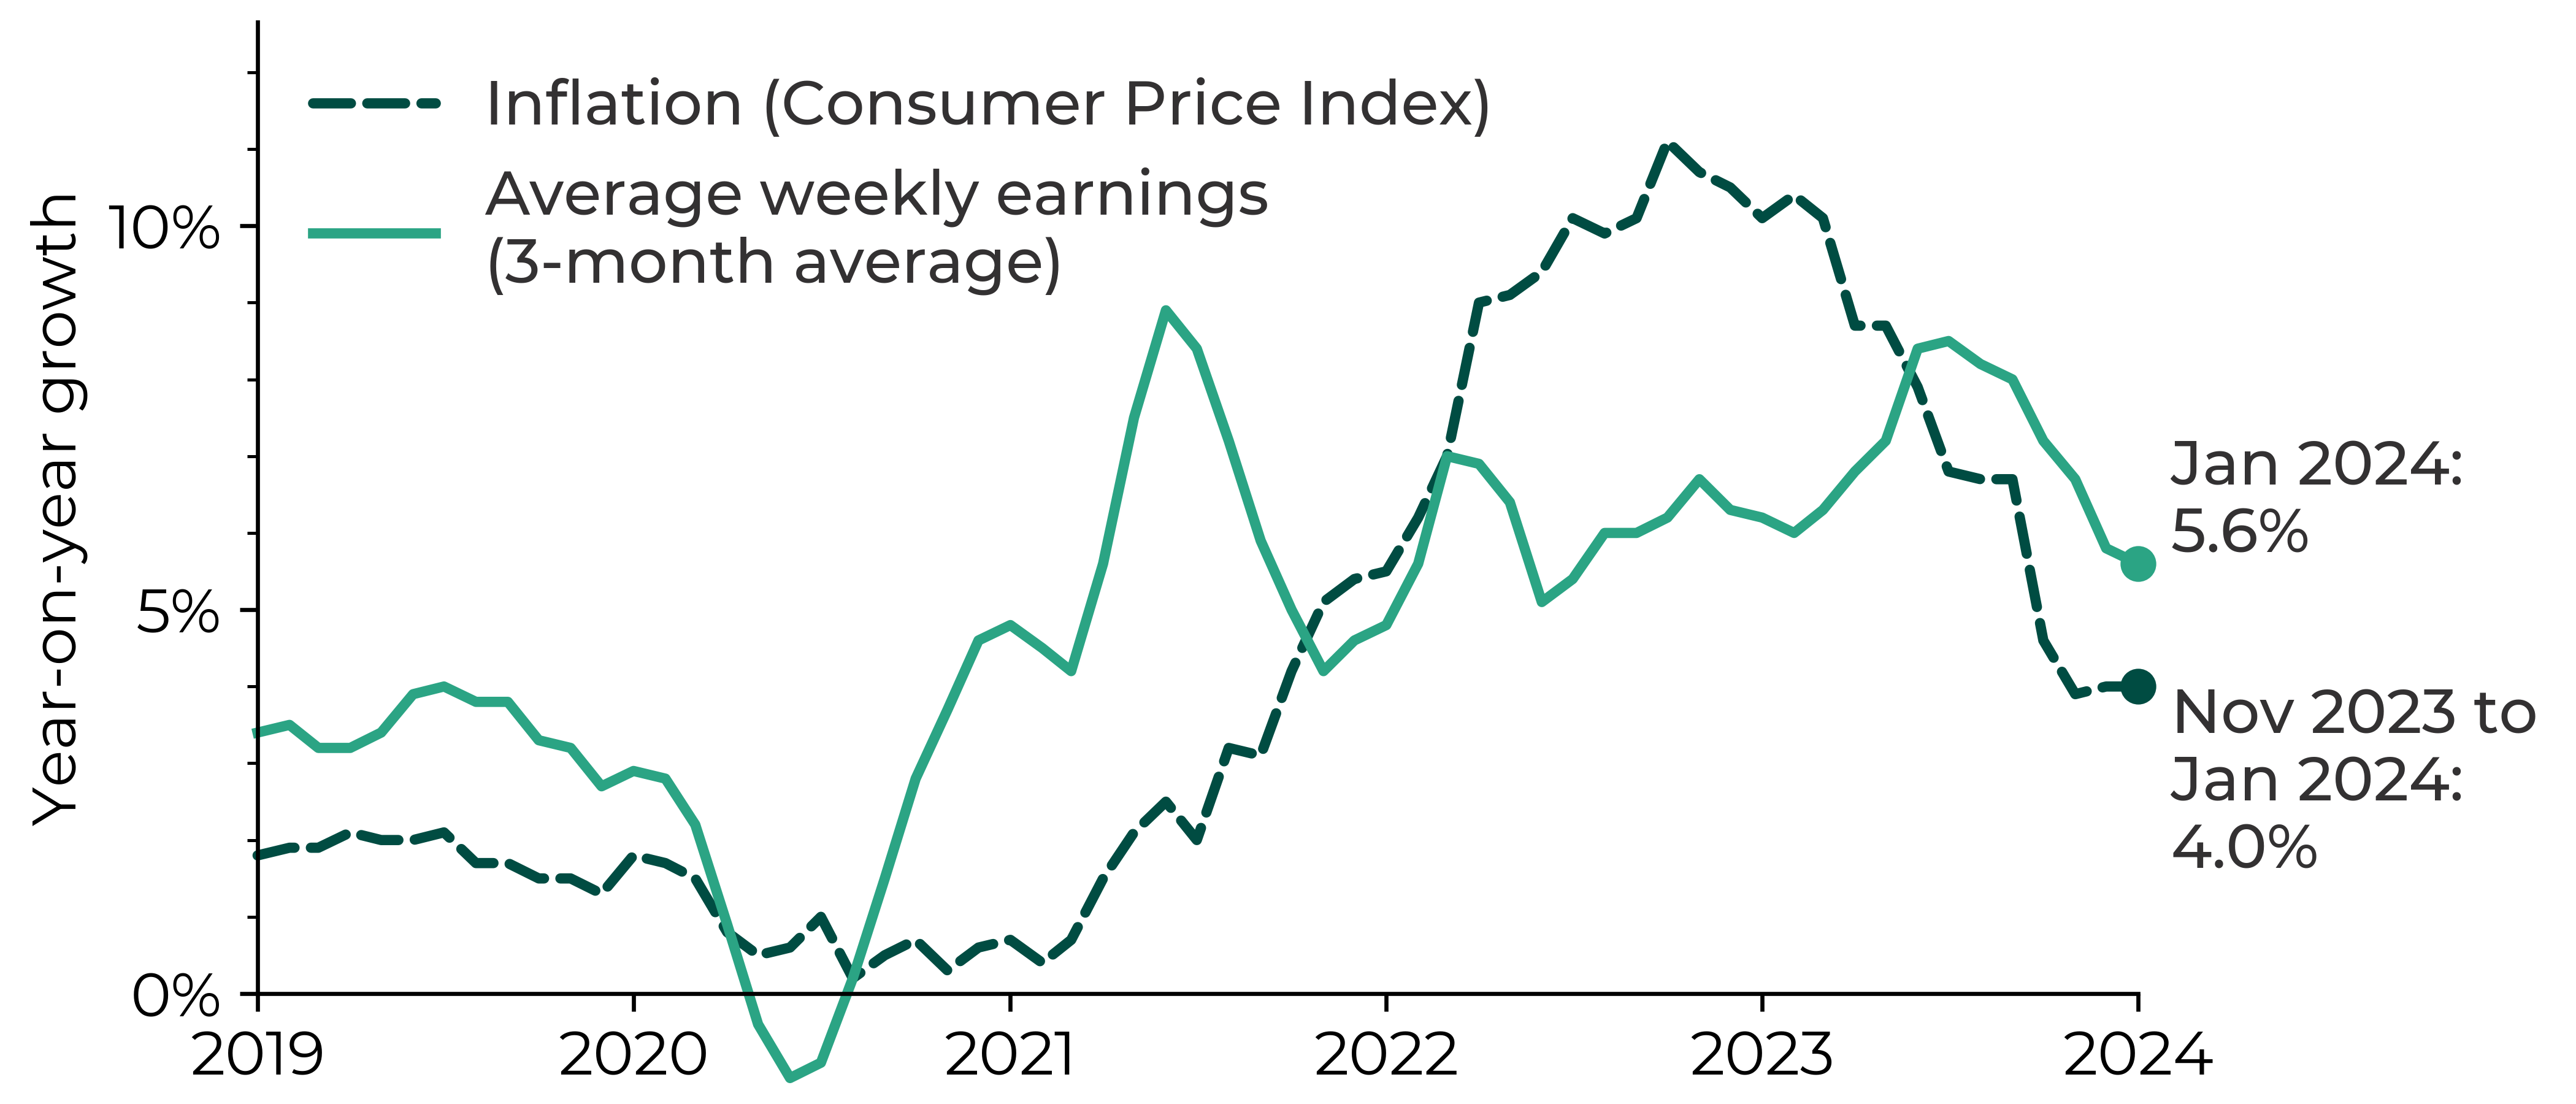 Graph showing UK inflation exceeding average weekly earnings (3-month average) in 2022-23. In January 2024, the average weekly earnings were 5.6% higher than for January 2023 whereas the Consumer Price Index inflation was at 4.0% in November 2023 to January 2024.